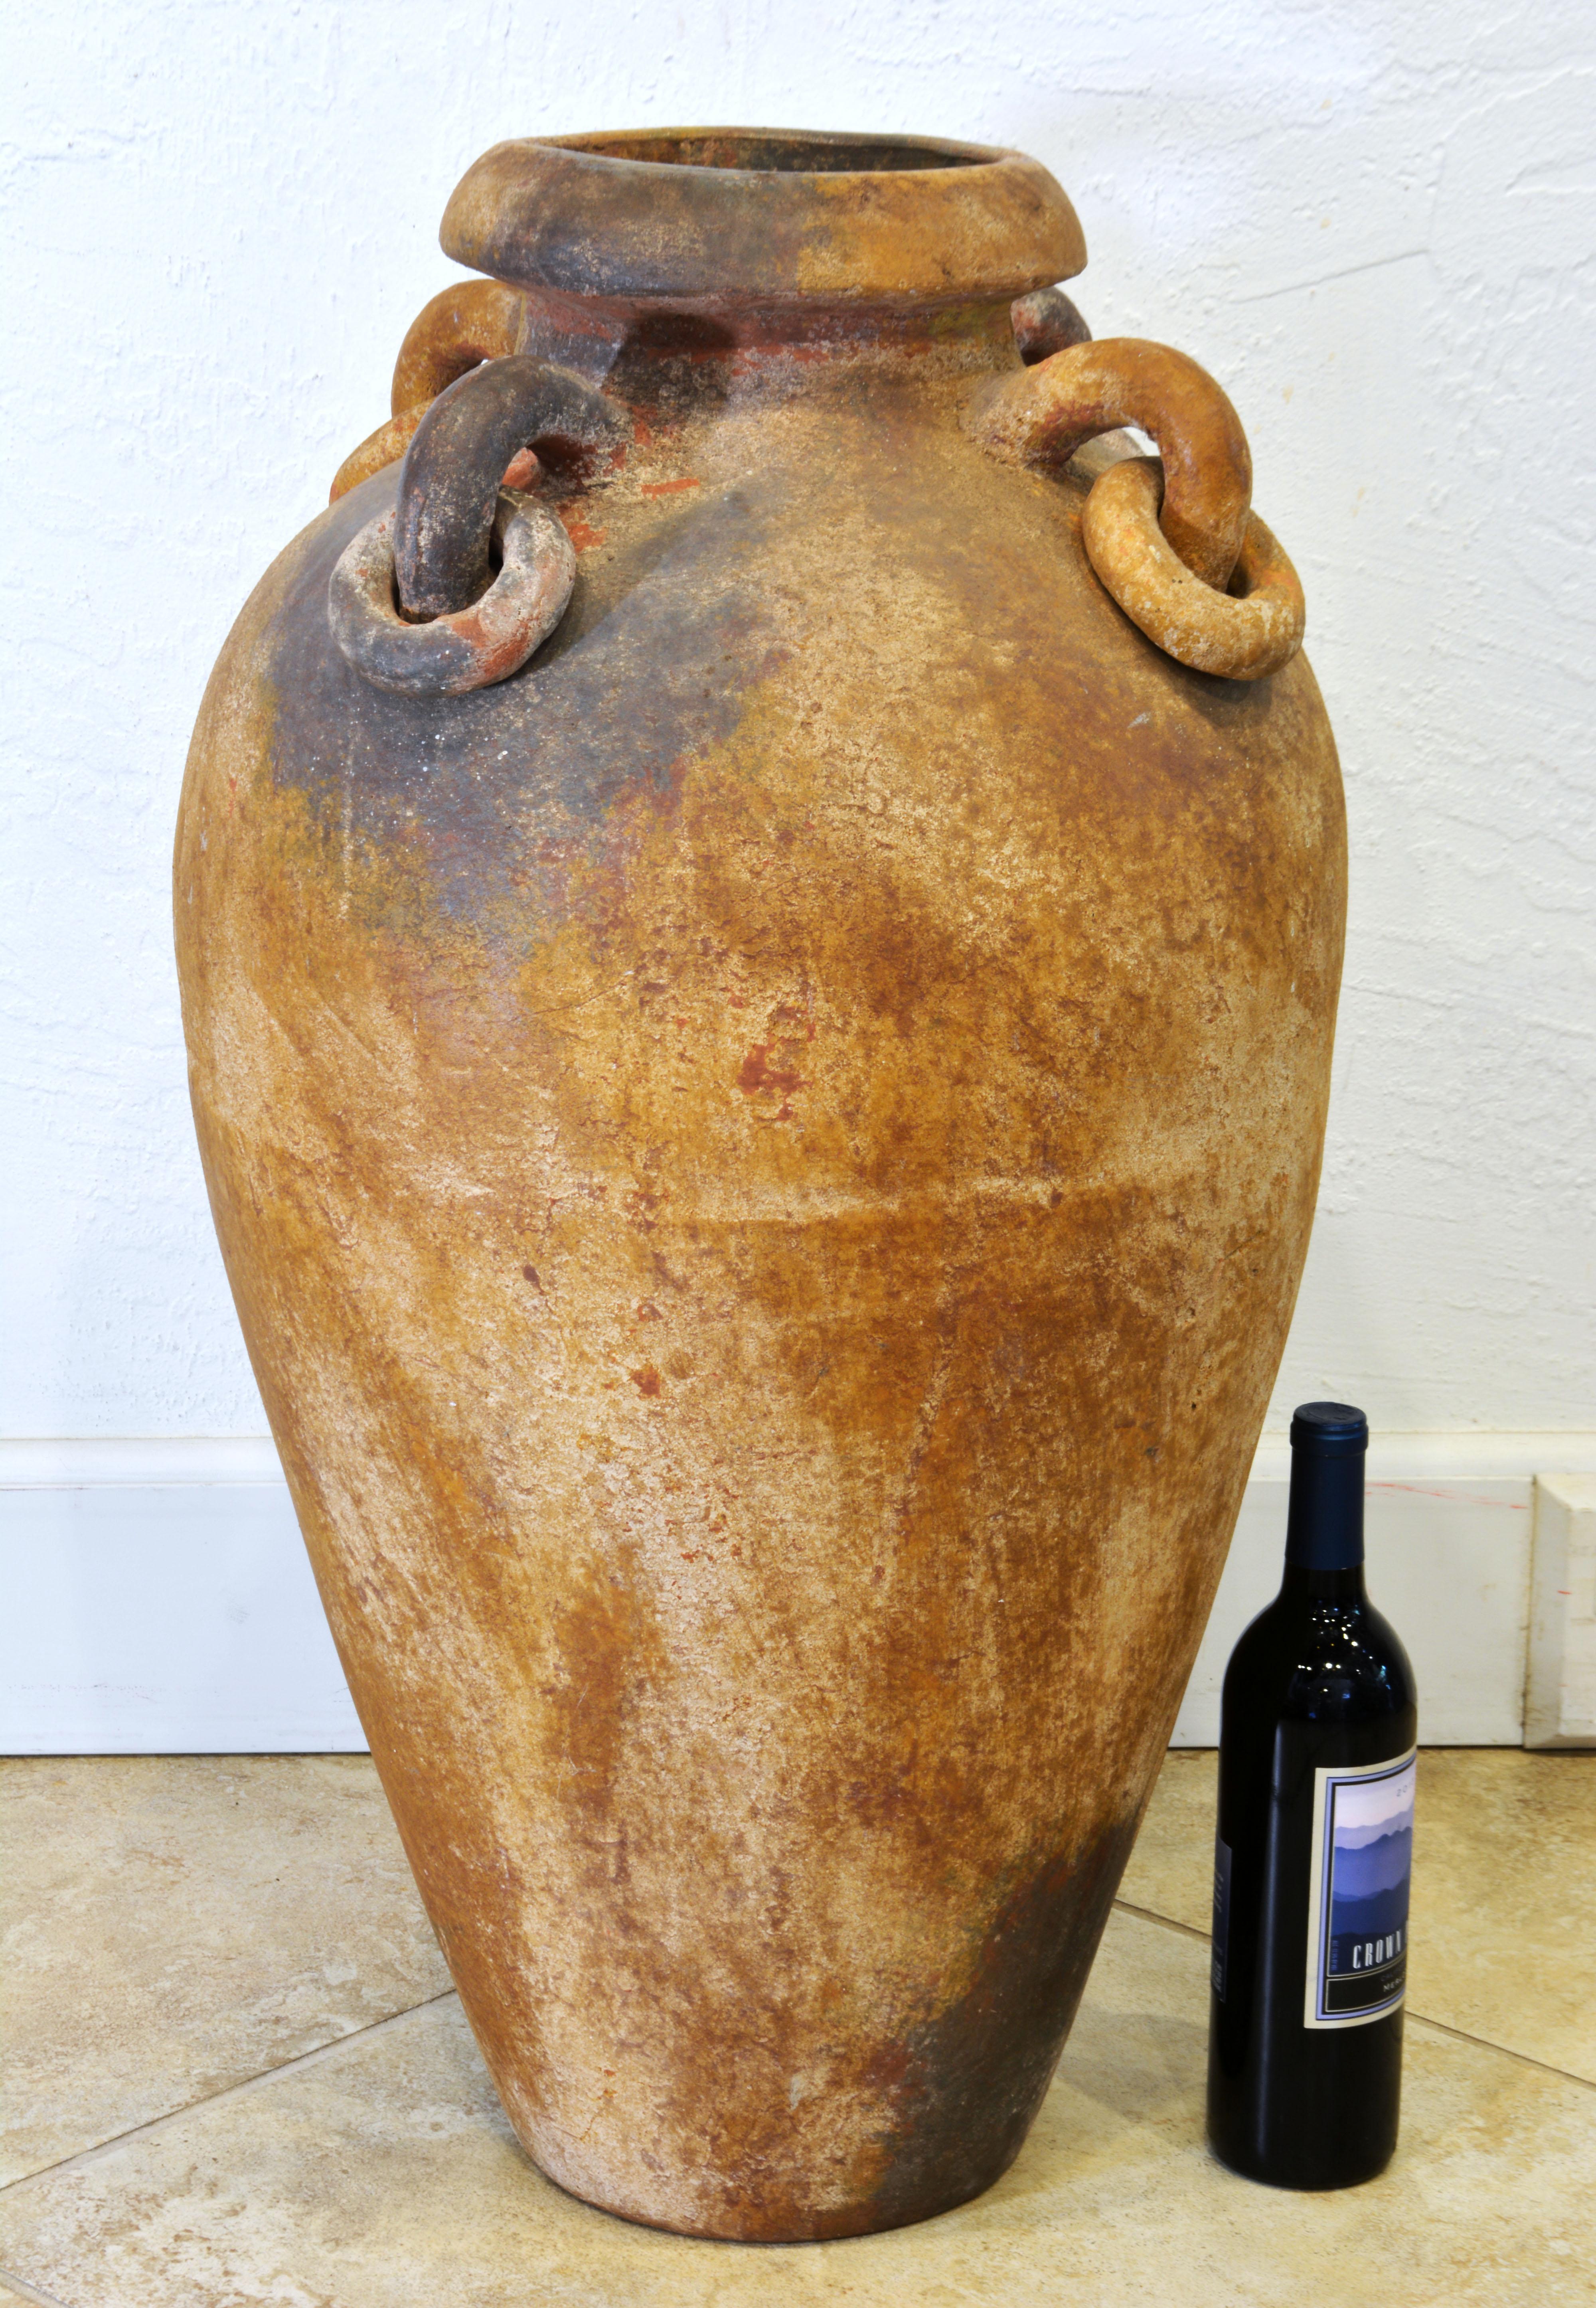 Standing almost 32 inches tall this beautifully patinated terracotta olive jar will make a great impression indoors as well as outdoors. Of classic form It features a wide flared mouth and four ring handles adding a sculptural effect.